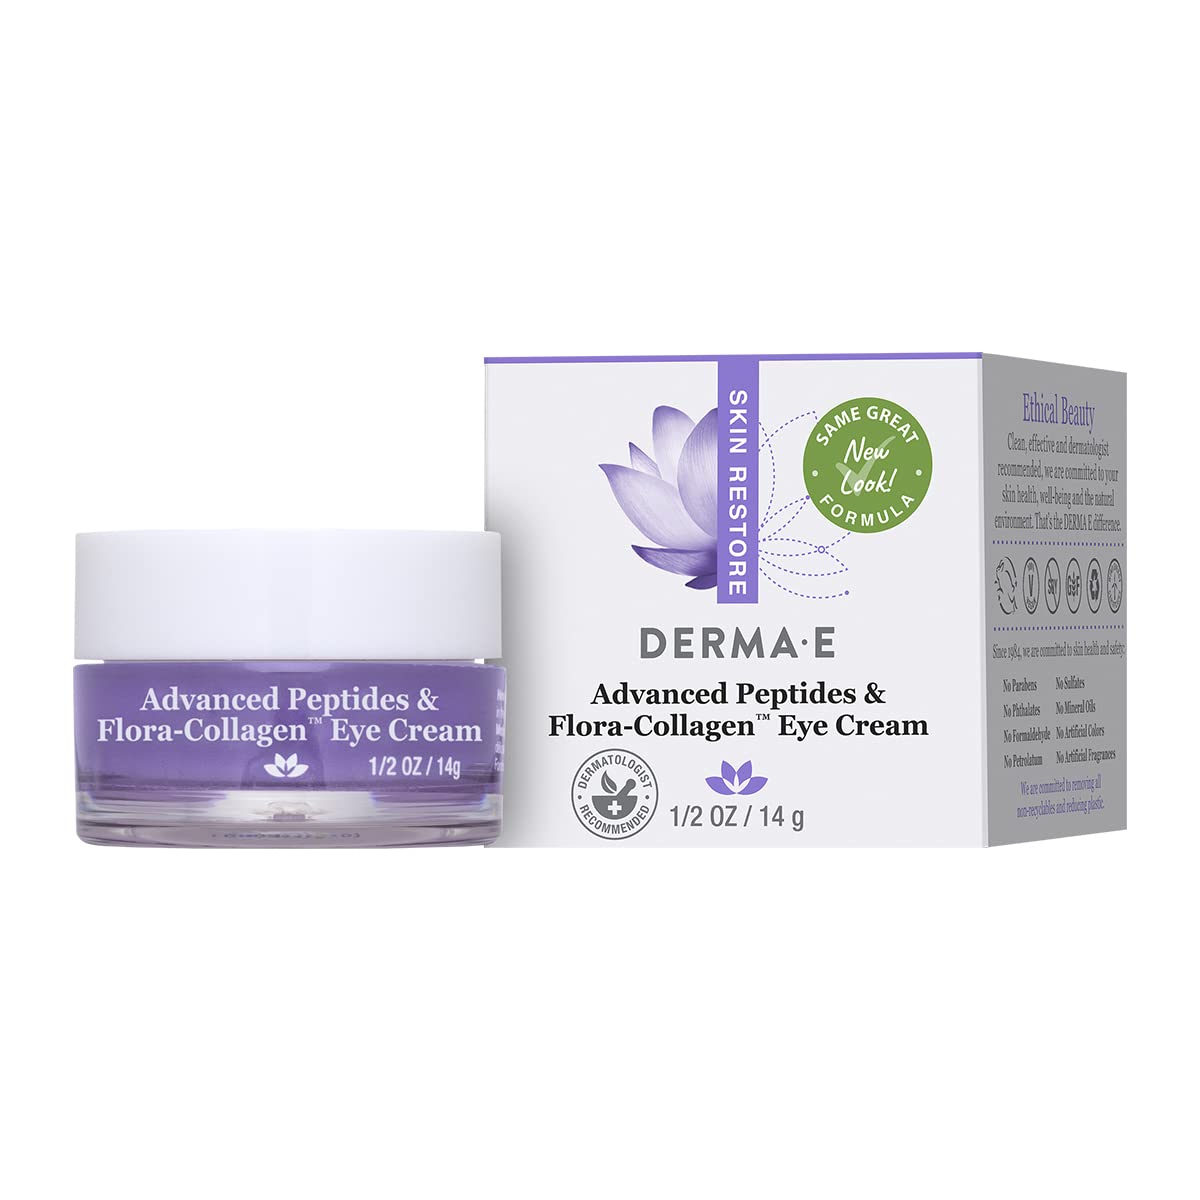 DERMA-E Advanced Peptides and Flora-Collagen Eye Cream – Anti-Aging Moisturizer Smooths Appearance of Crow’s Feet, Lines and Wrinkles, 1/2 Oz